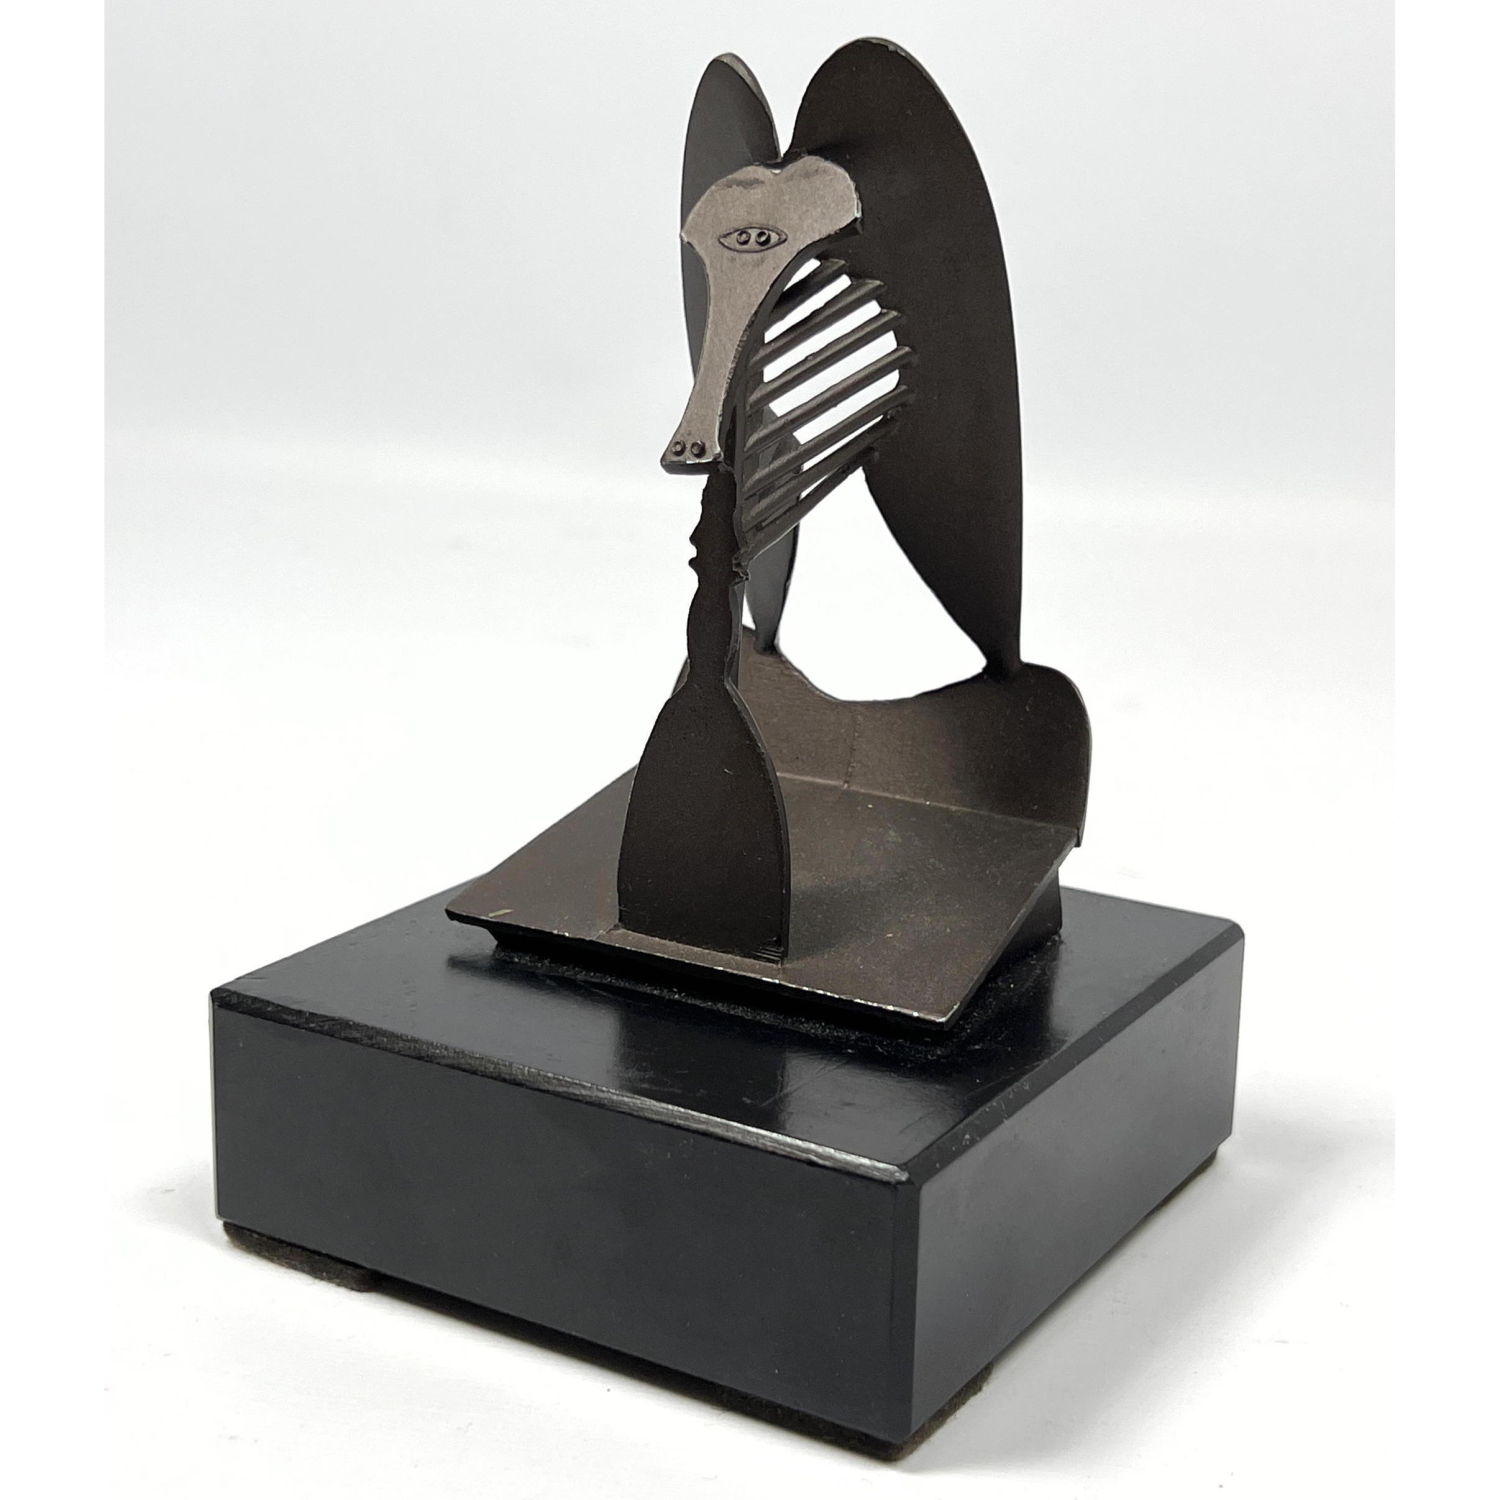 Chicago Picasso Model Sculpture Marked  2ff73f